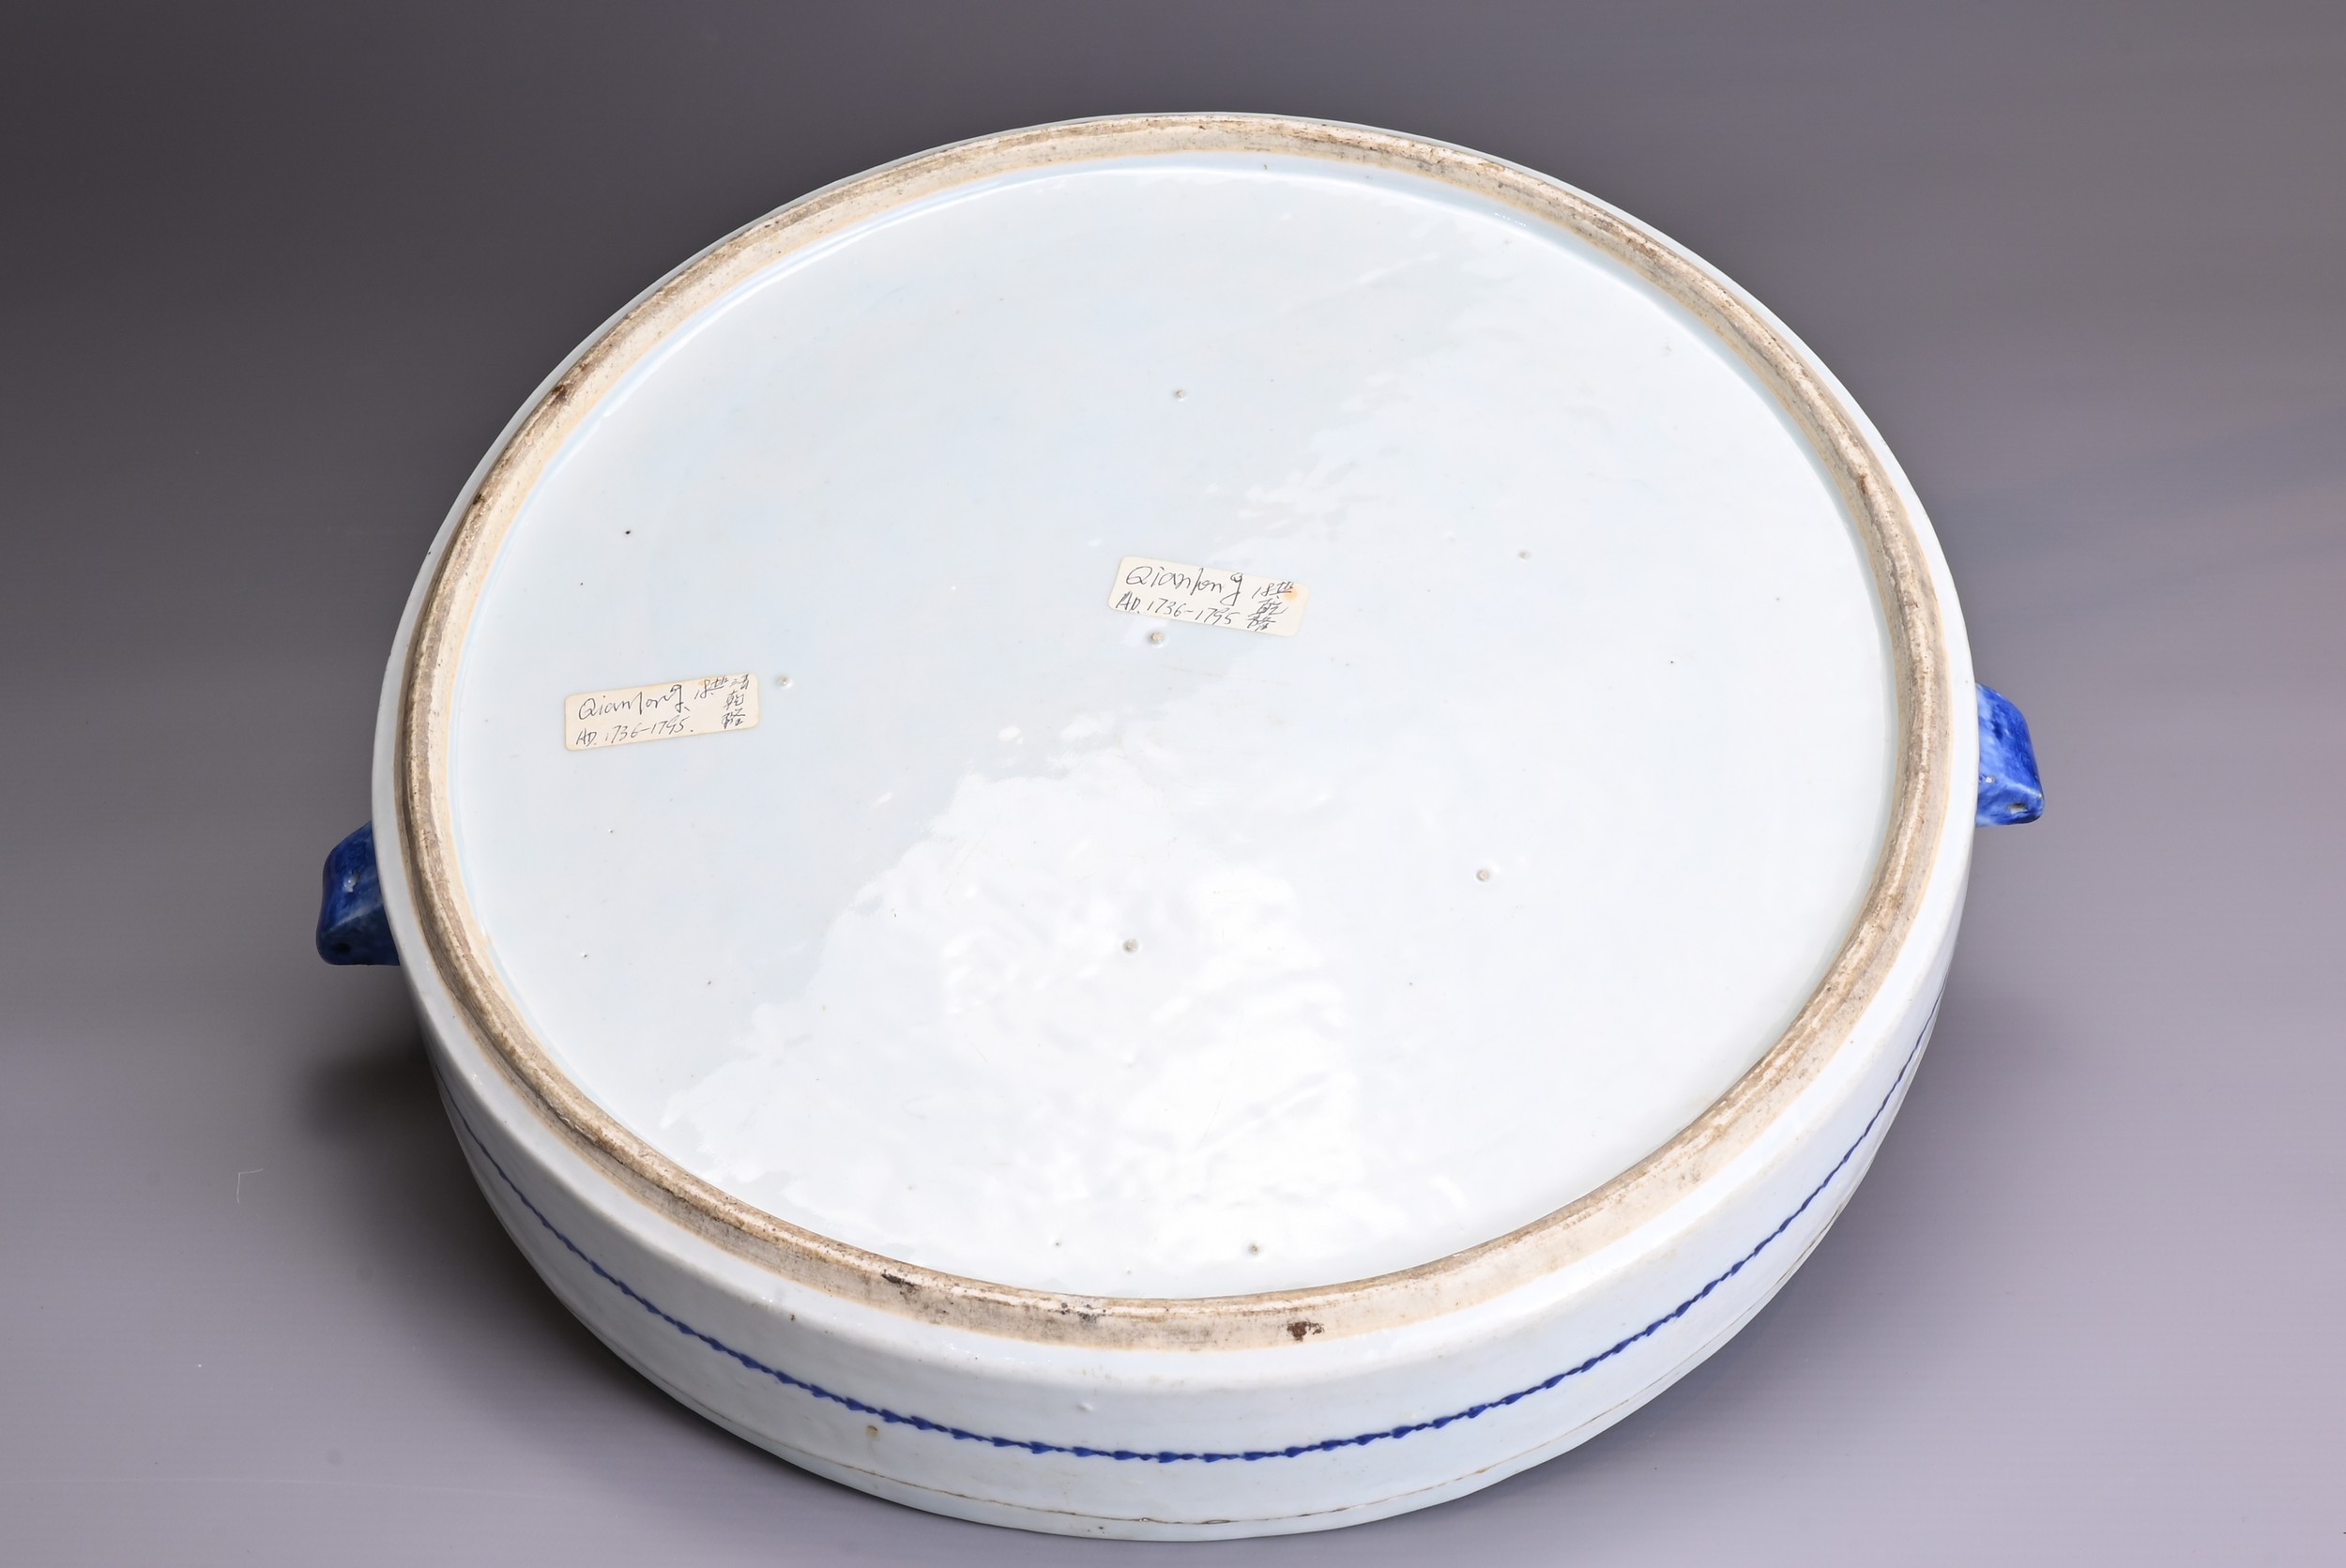 A LARGE CHINESE BLUE AND WHITE PORCELAIN WARMING DISH, 18TH CENTURY. Minimally decorated with - Image 3 of 6